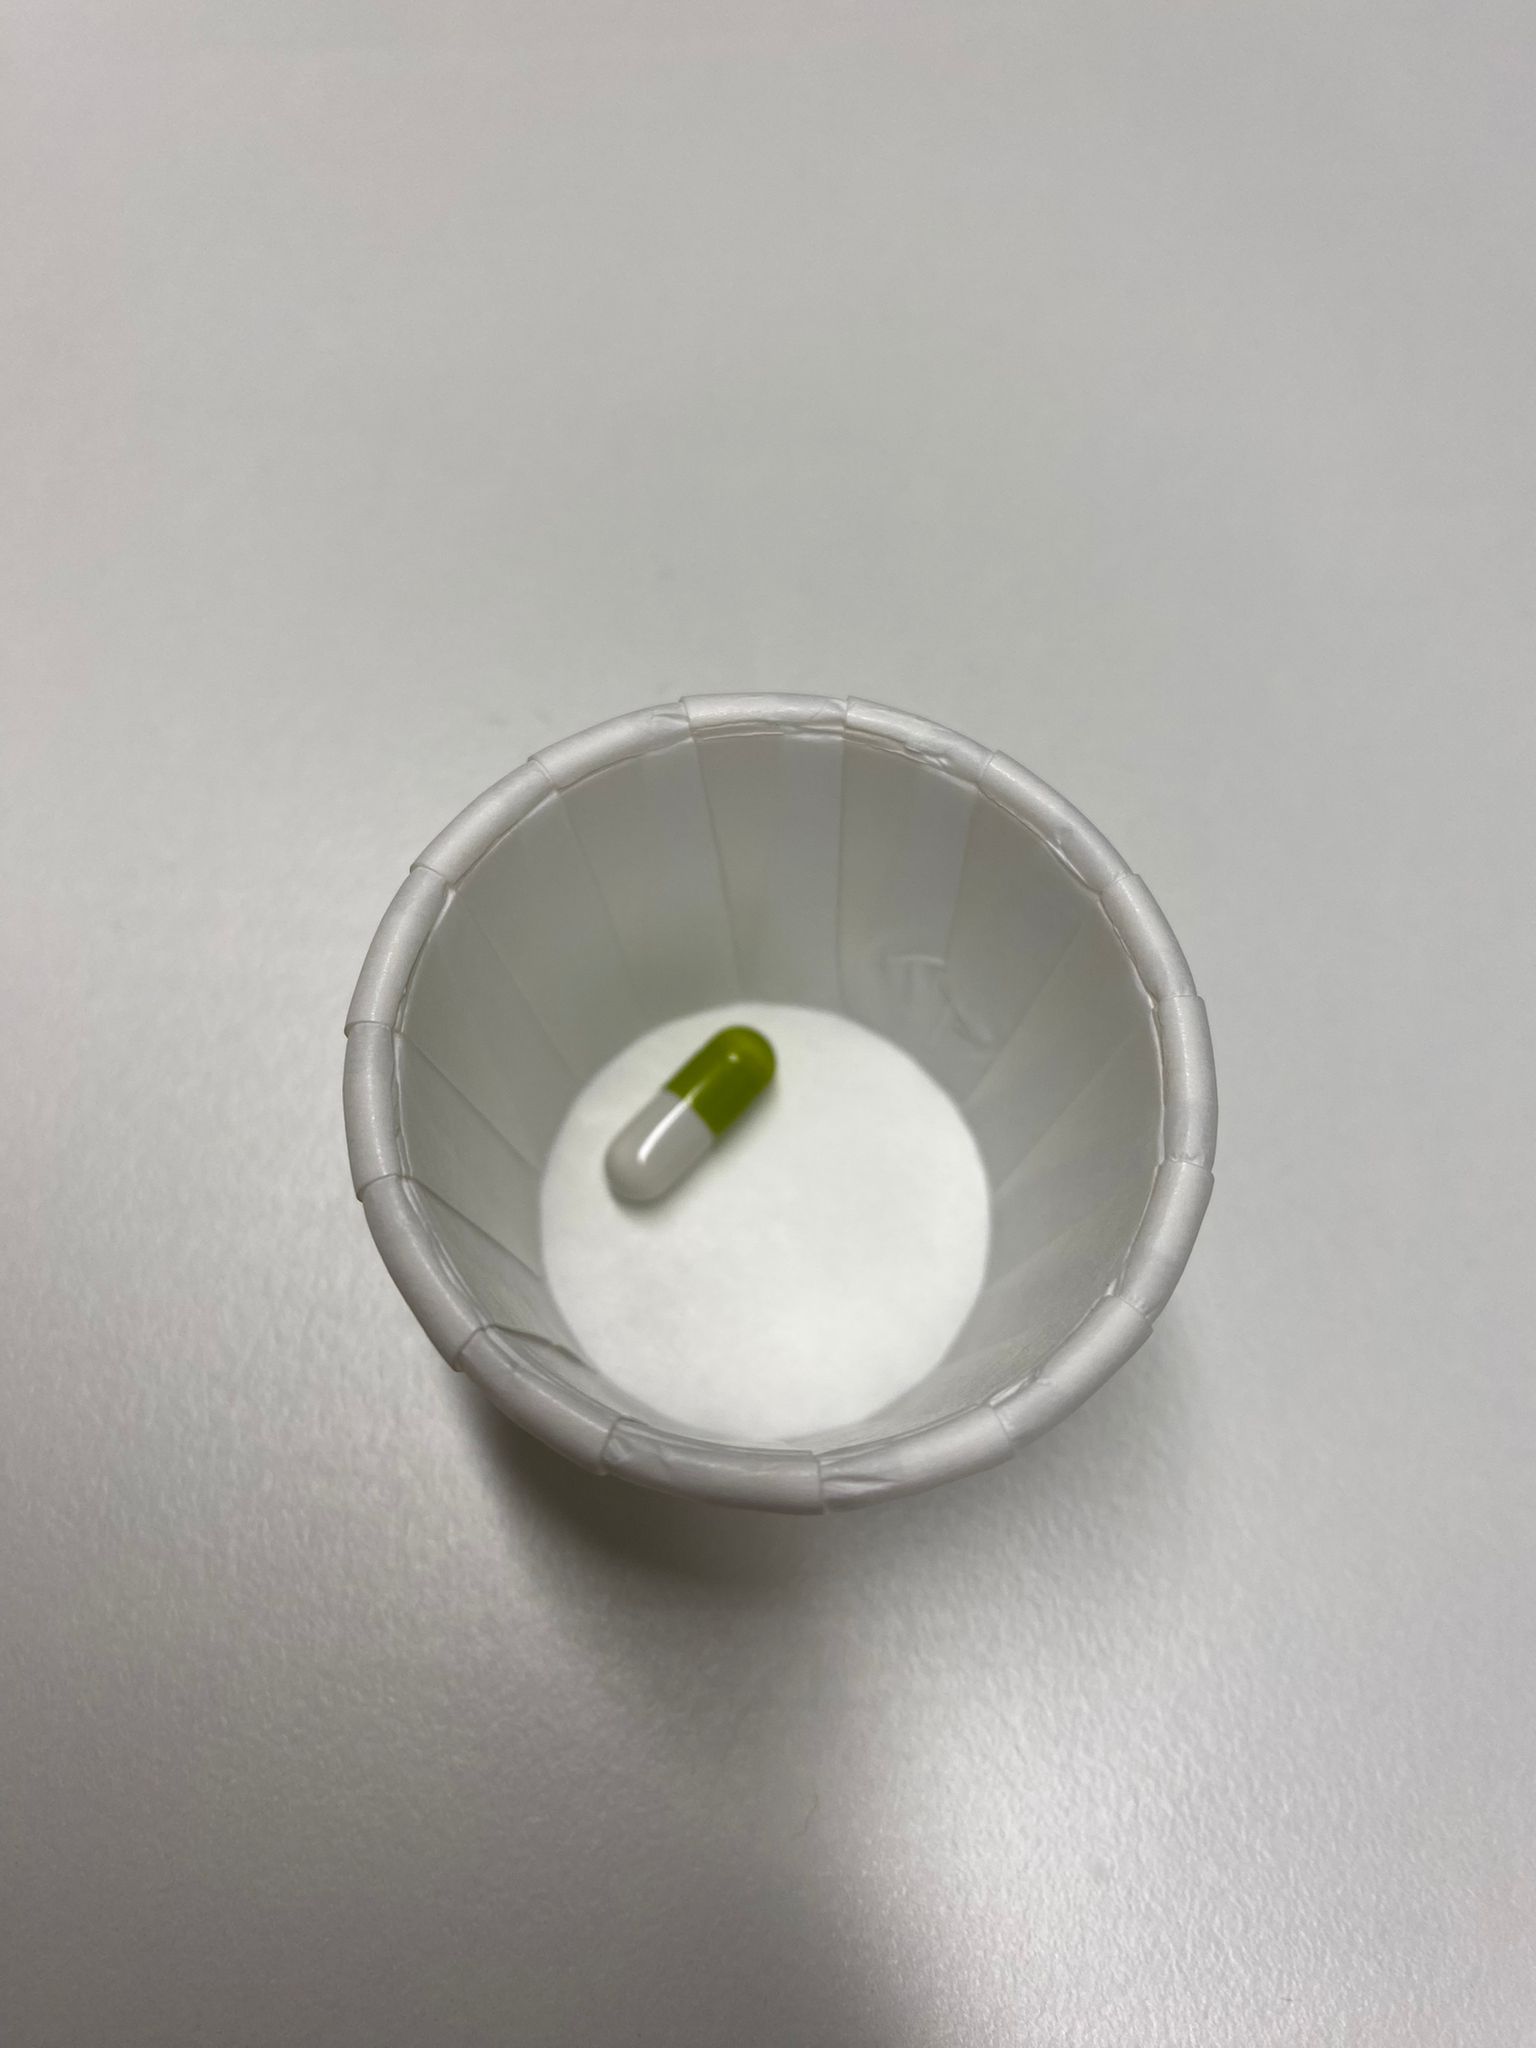 A white paper bowl with a green and white pill in it.